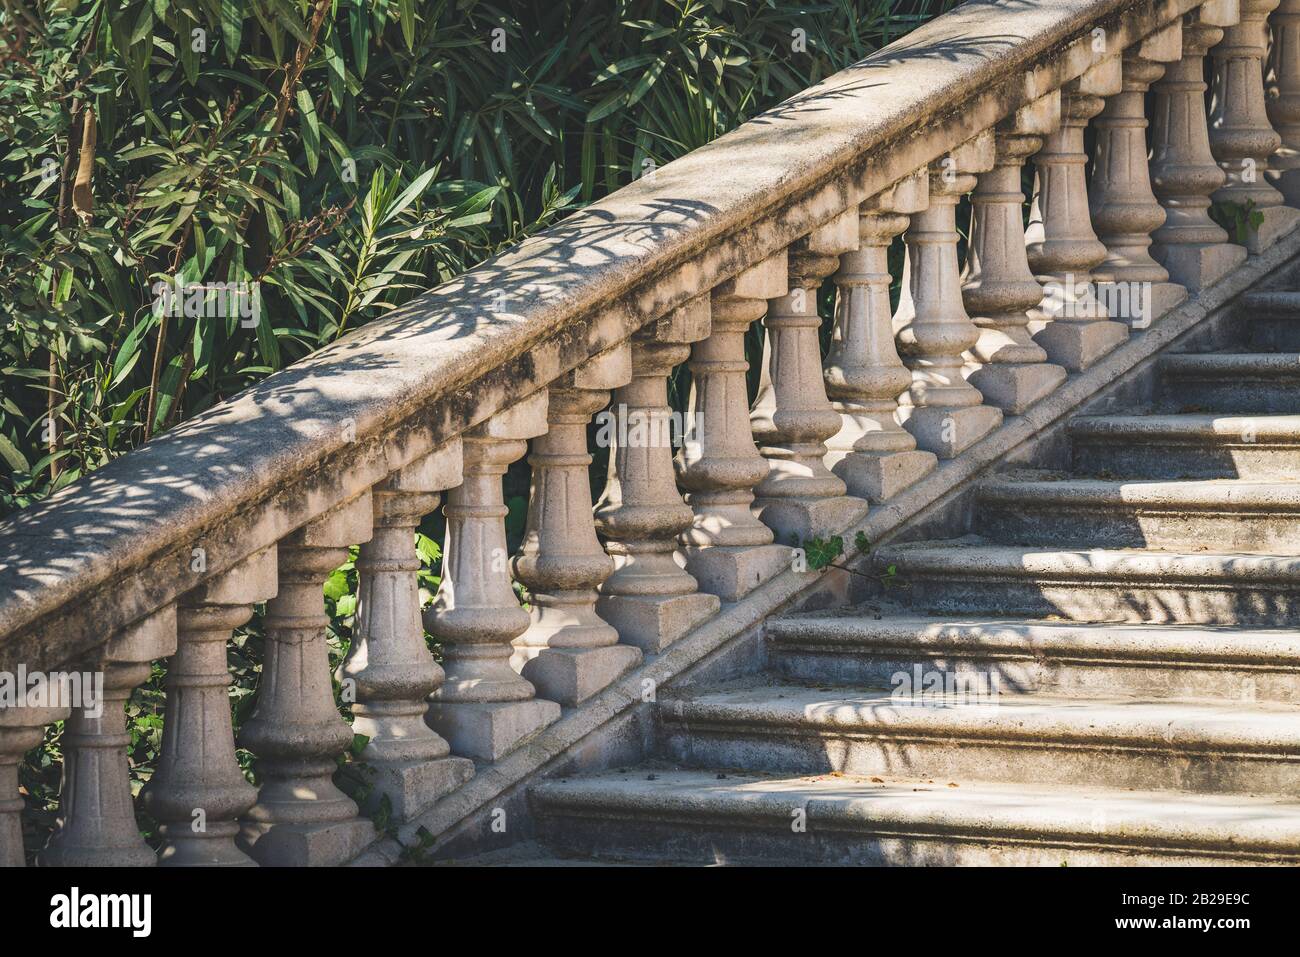 Stone balustrade in neoclassical style Stock Photo